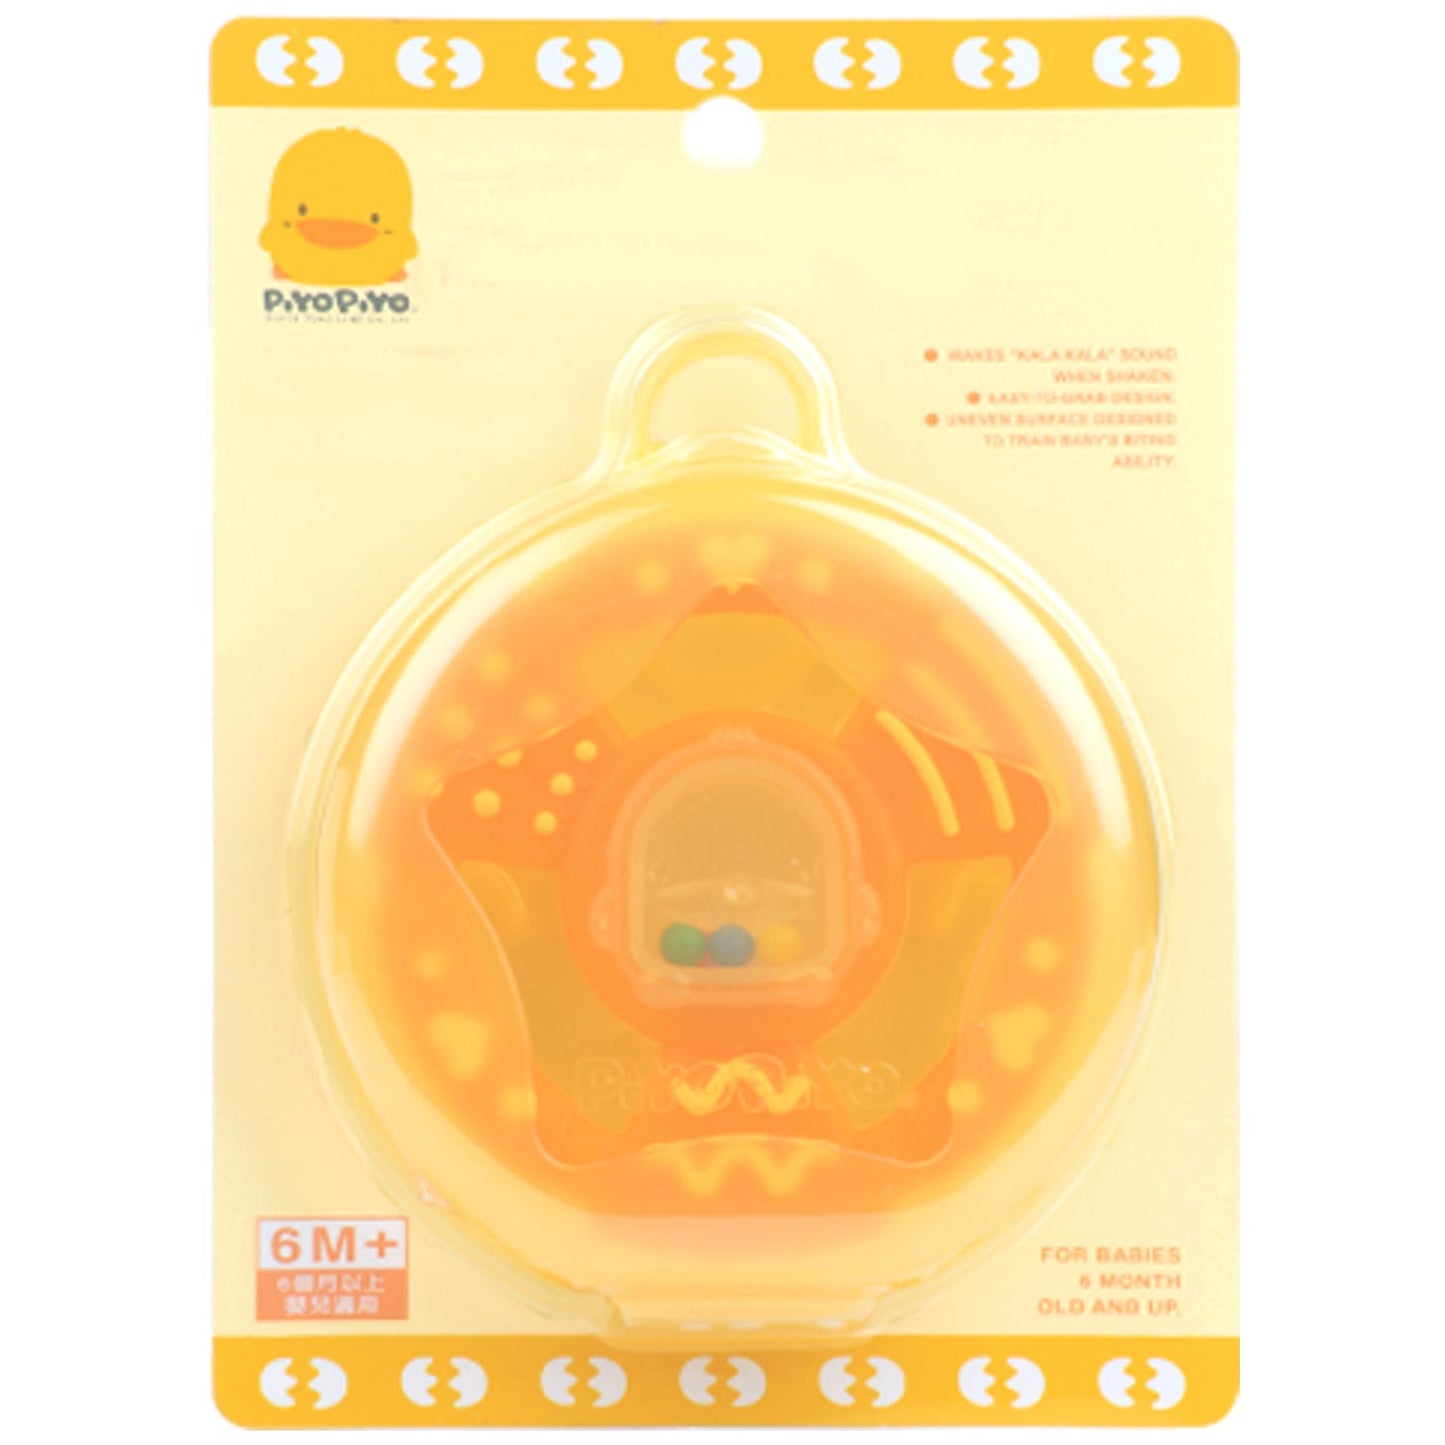 Round Rattle Teether